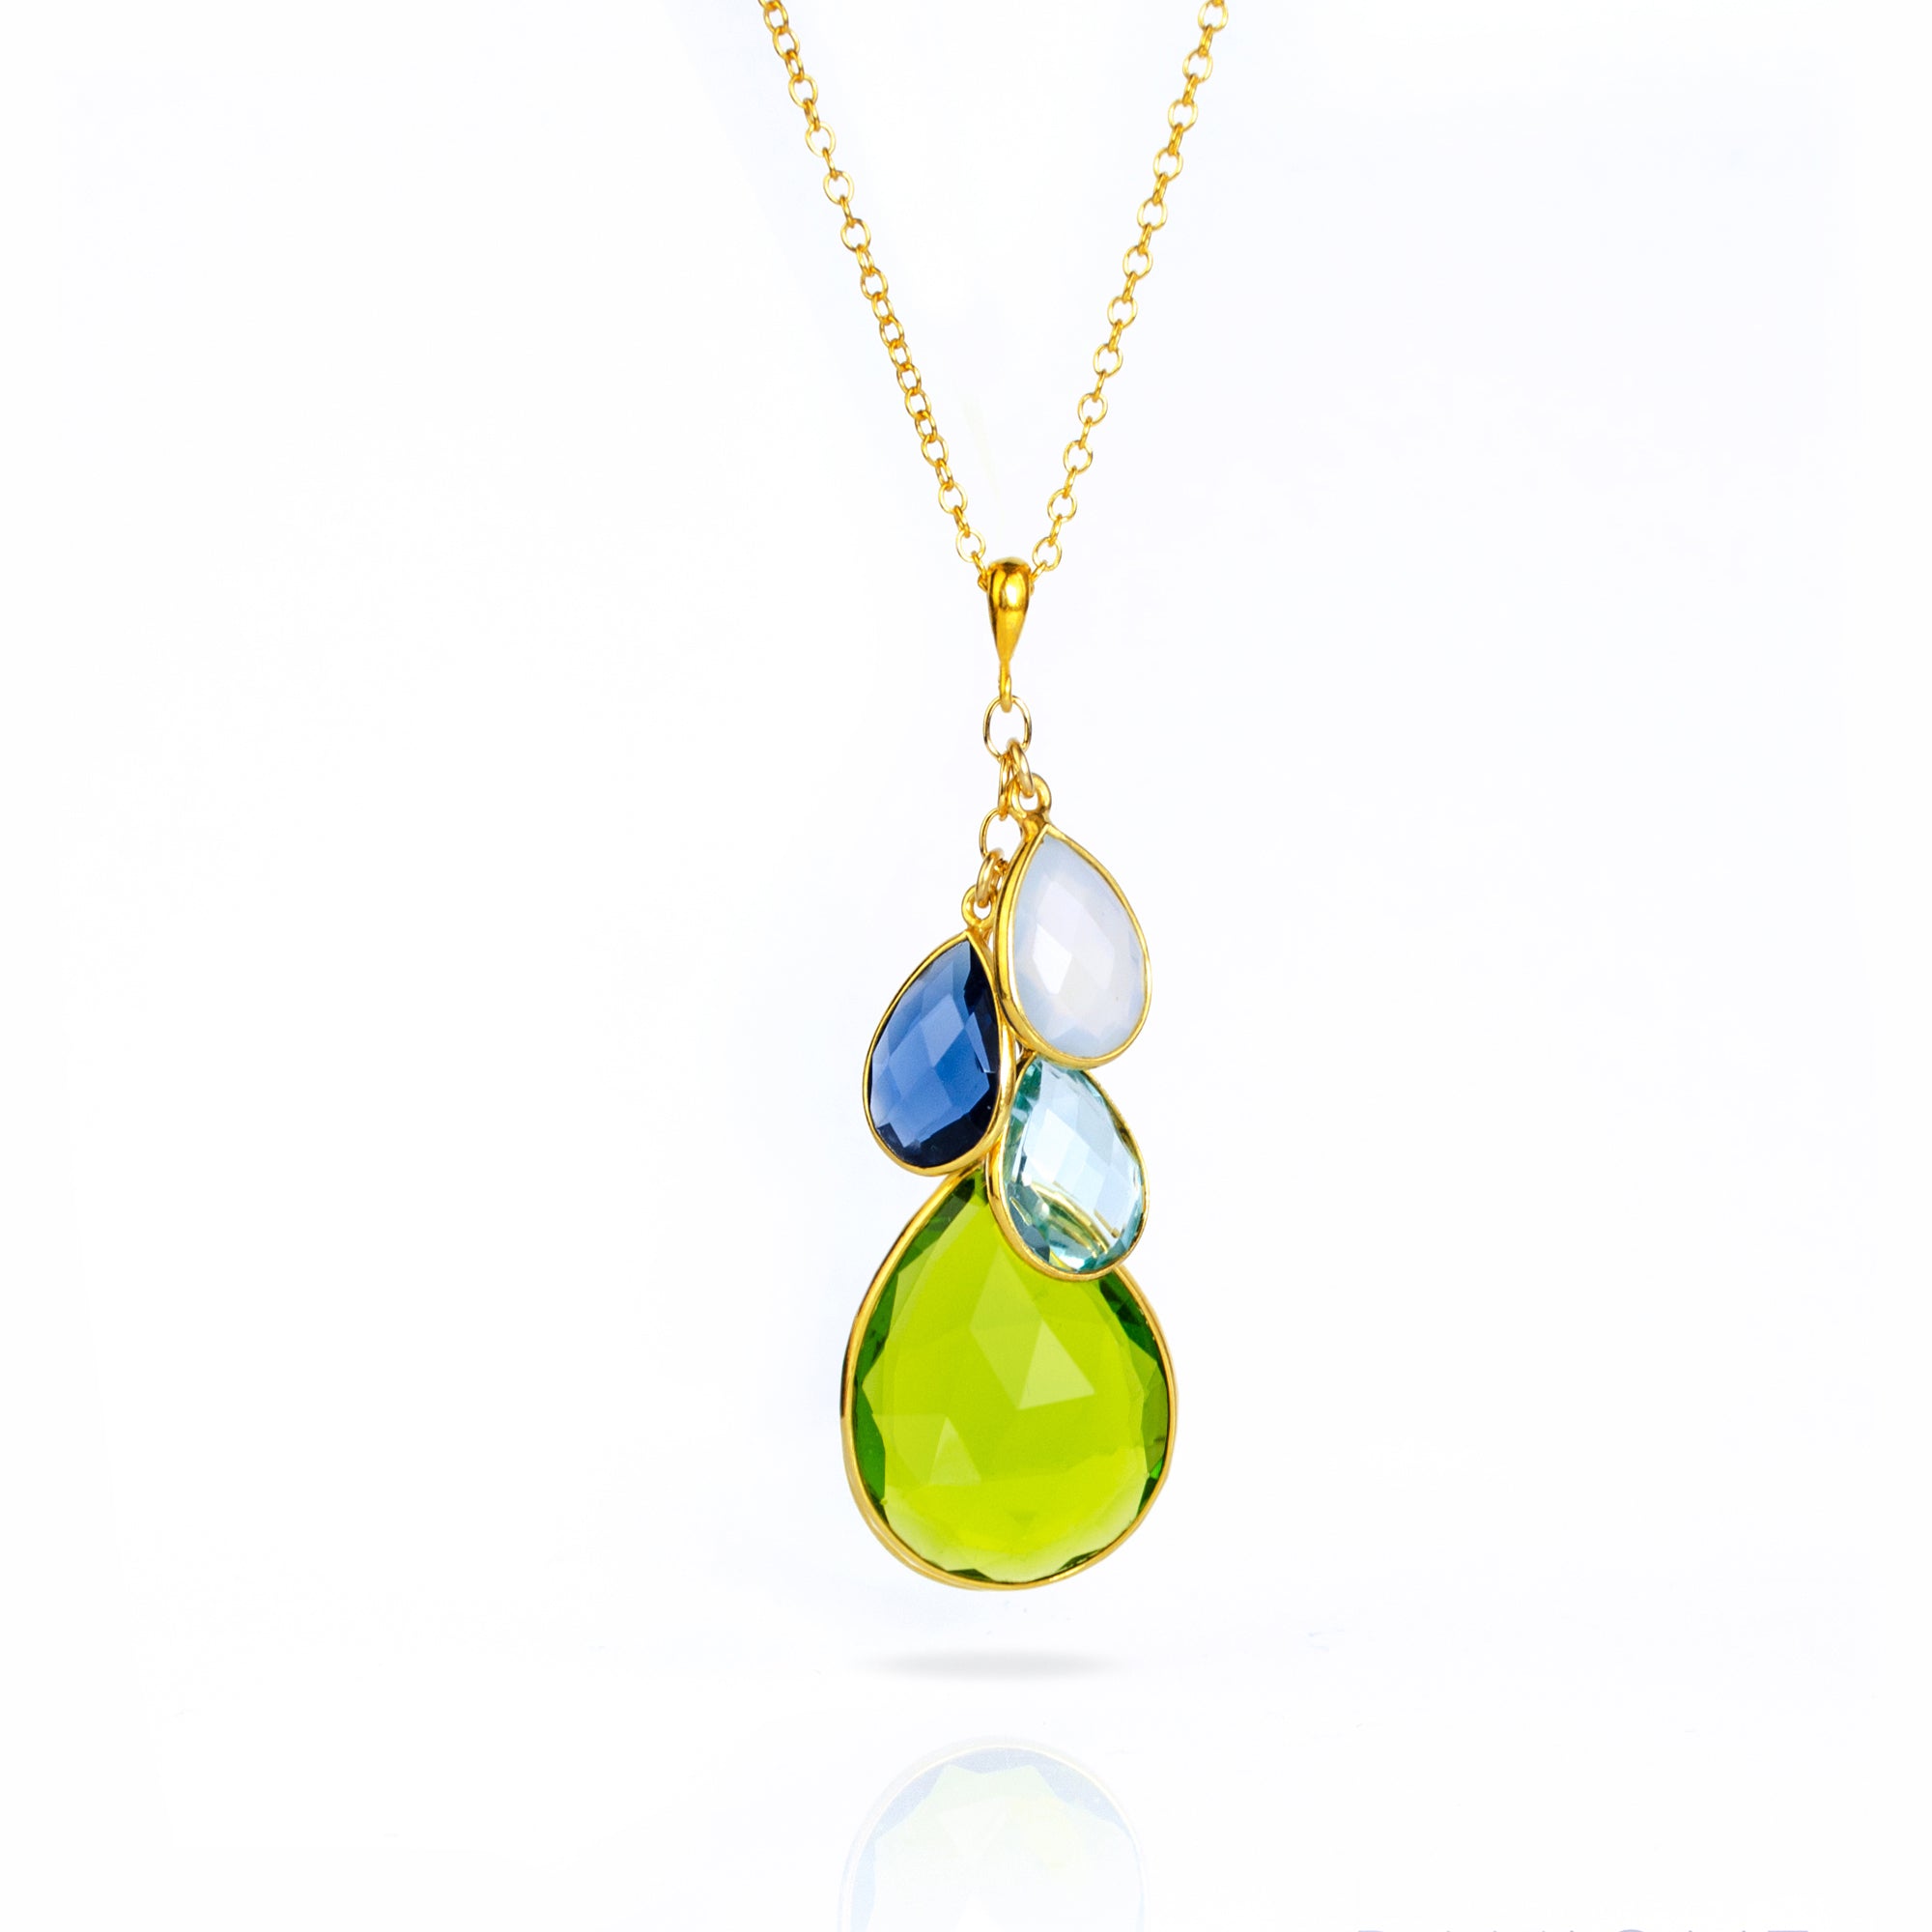 https://cdn.shopify.com/s/files/1/0362/2461/products/large-small-teardrop-cascade-necklace-square-0073_2000x.jpg?v=1594217804